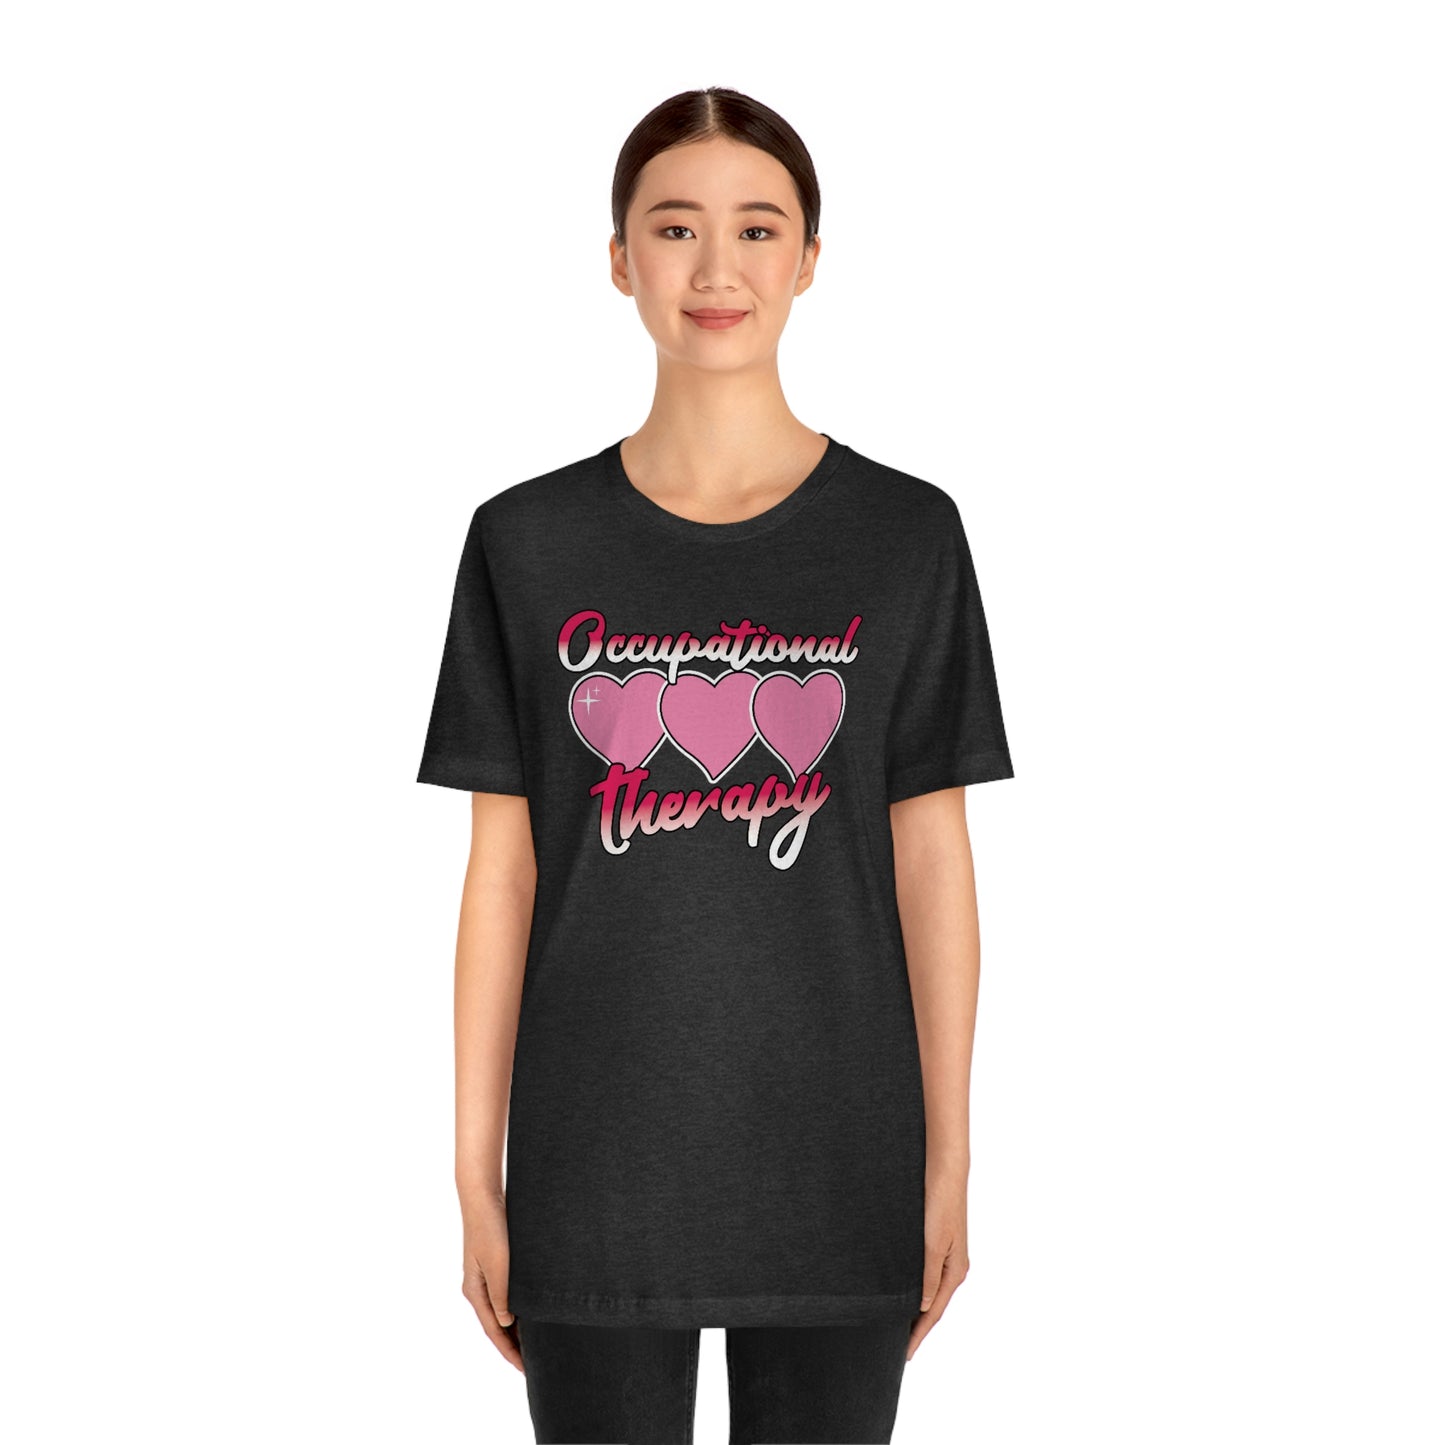 Occupational Therapy Hearts Valentine's Day Shirt